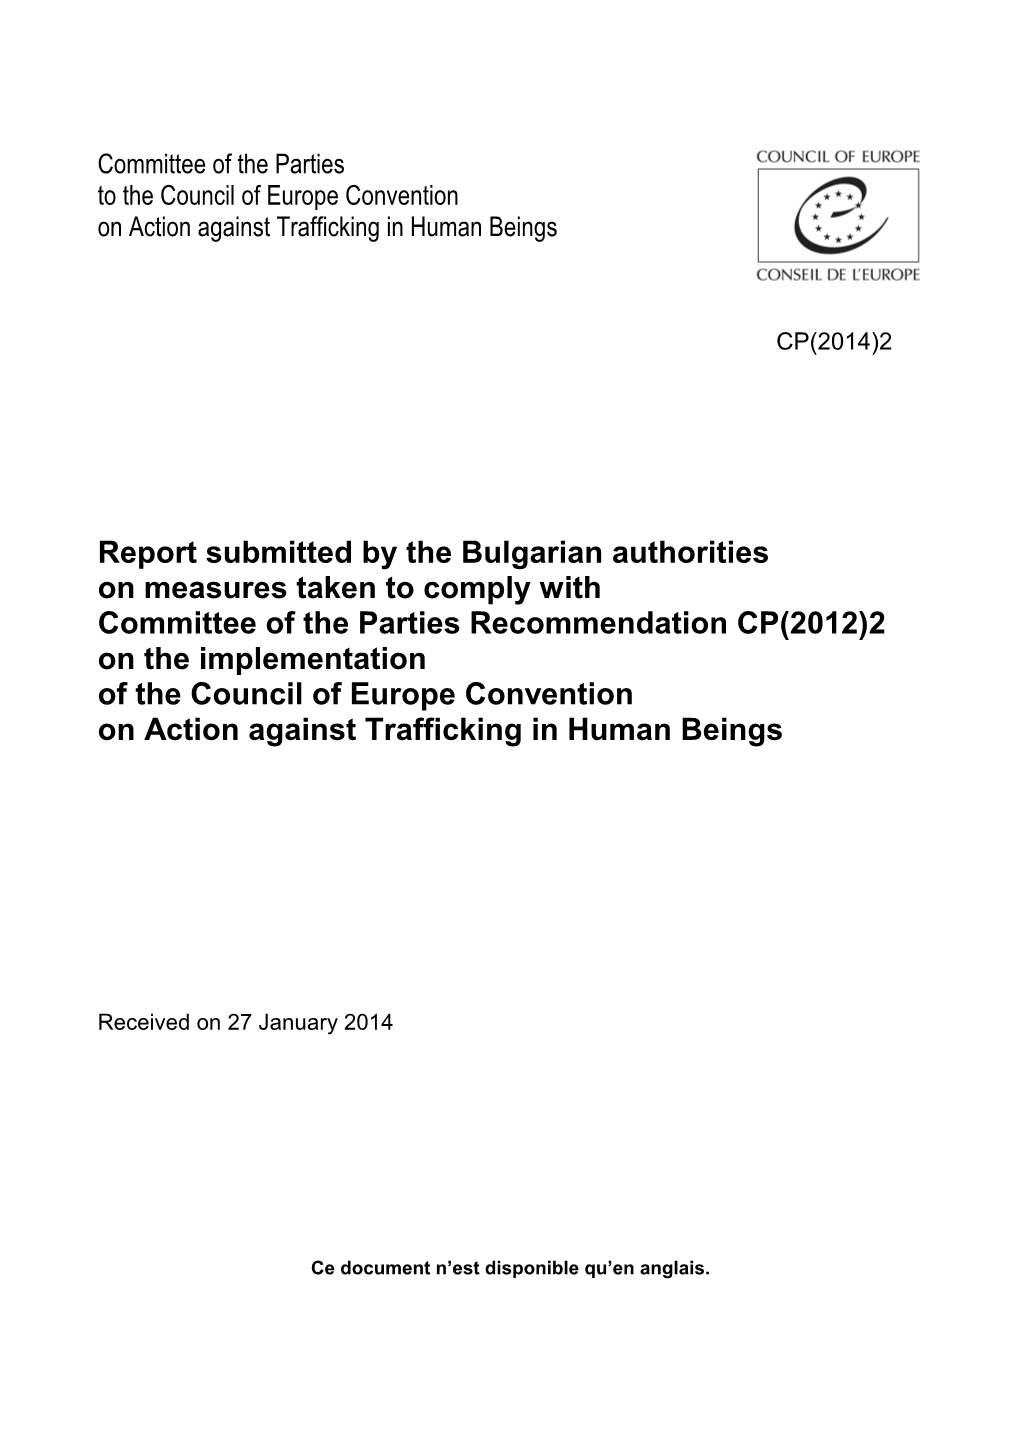 Report Submitted by the Bulgarian Authorities on Measures